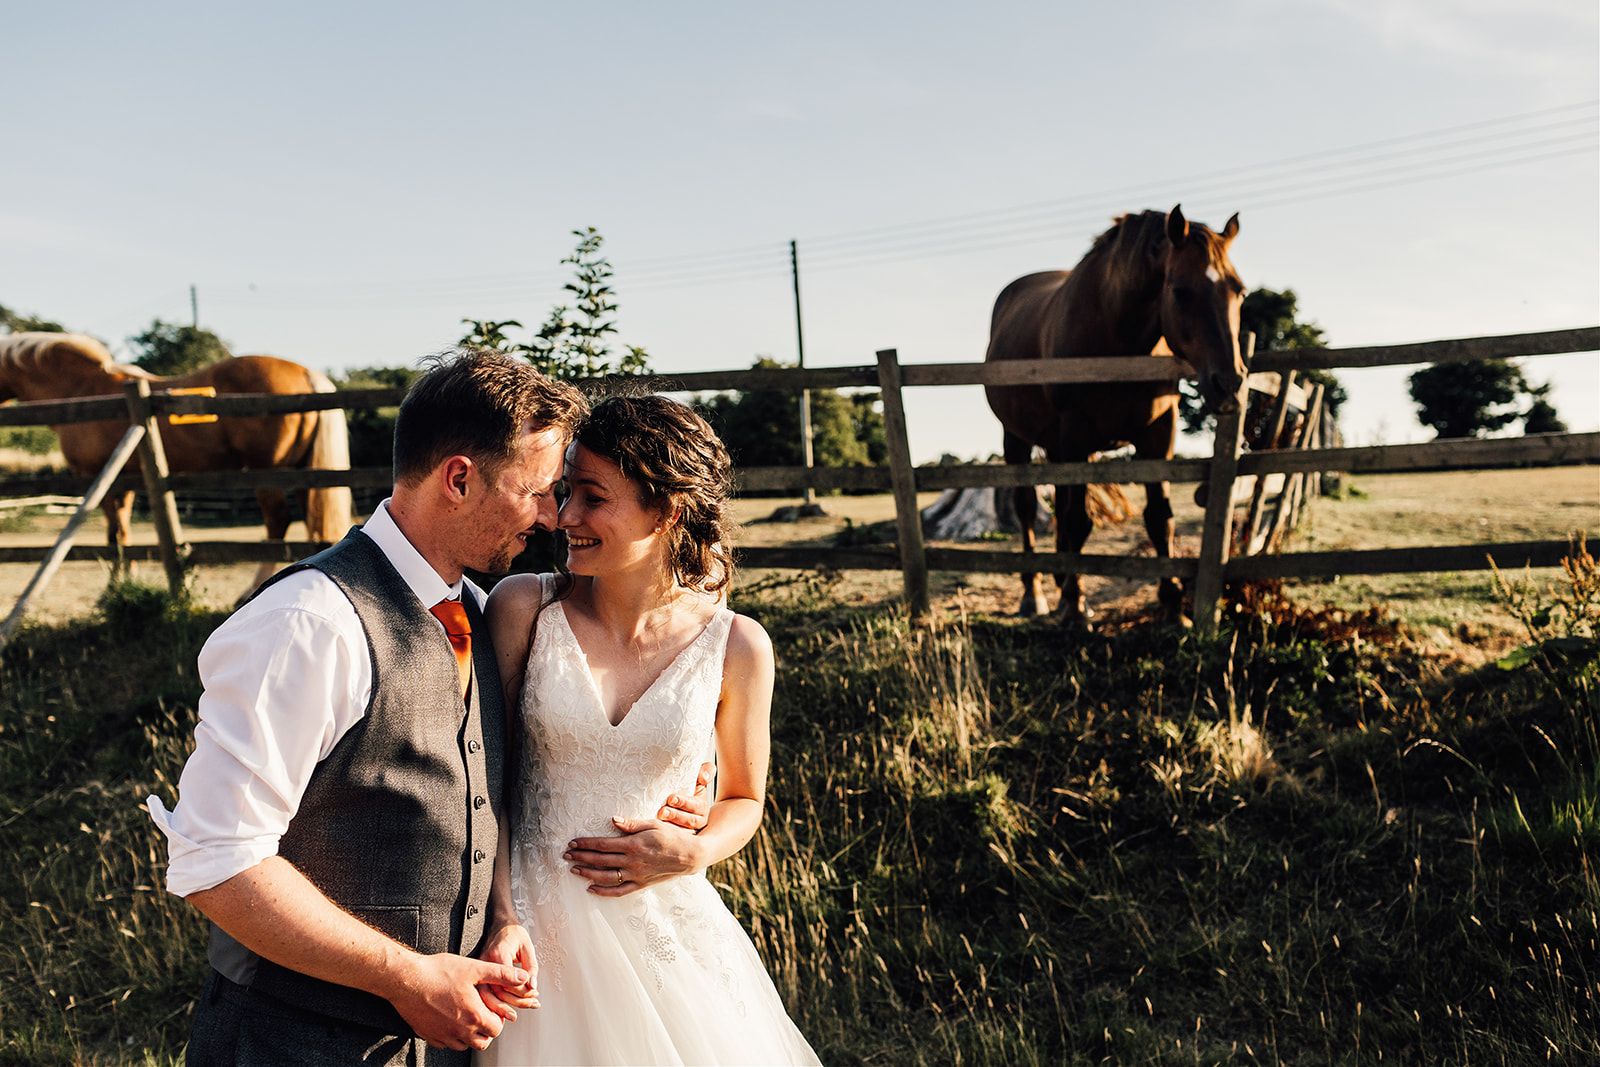 bride and groom portrait with horses and field in background